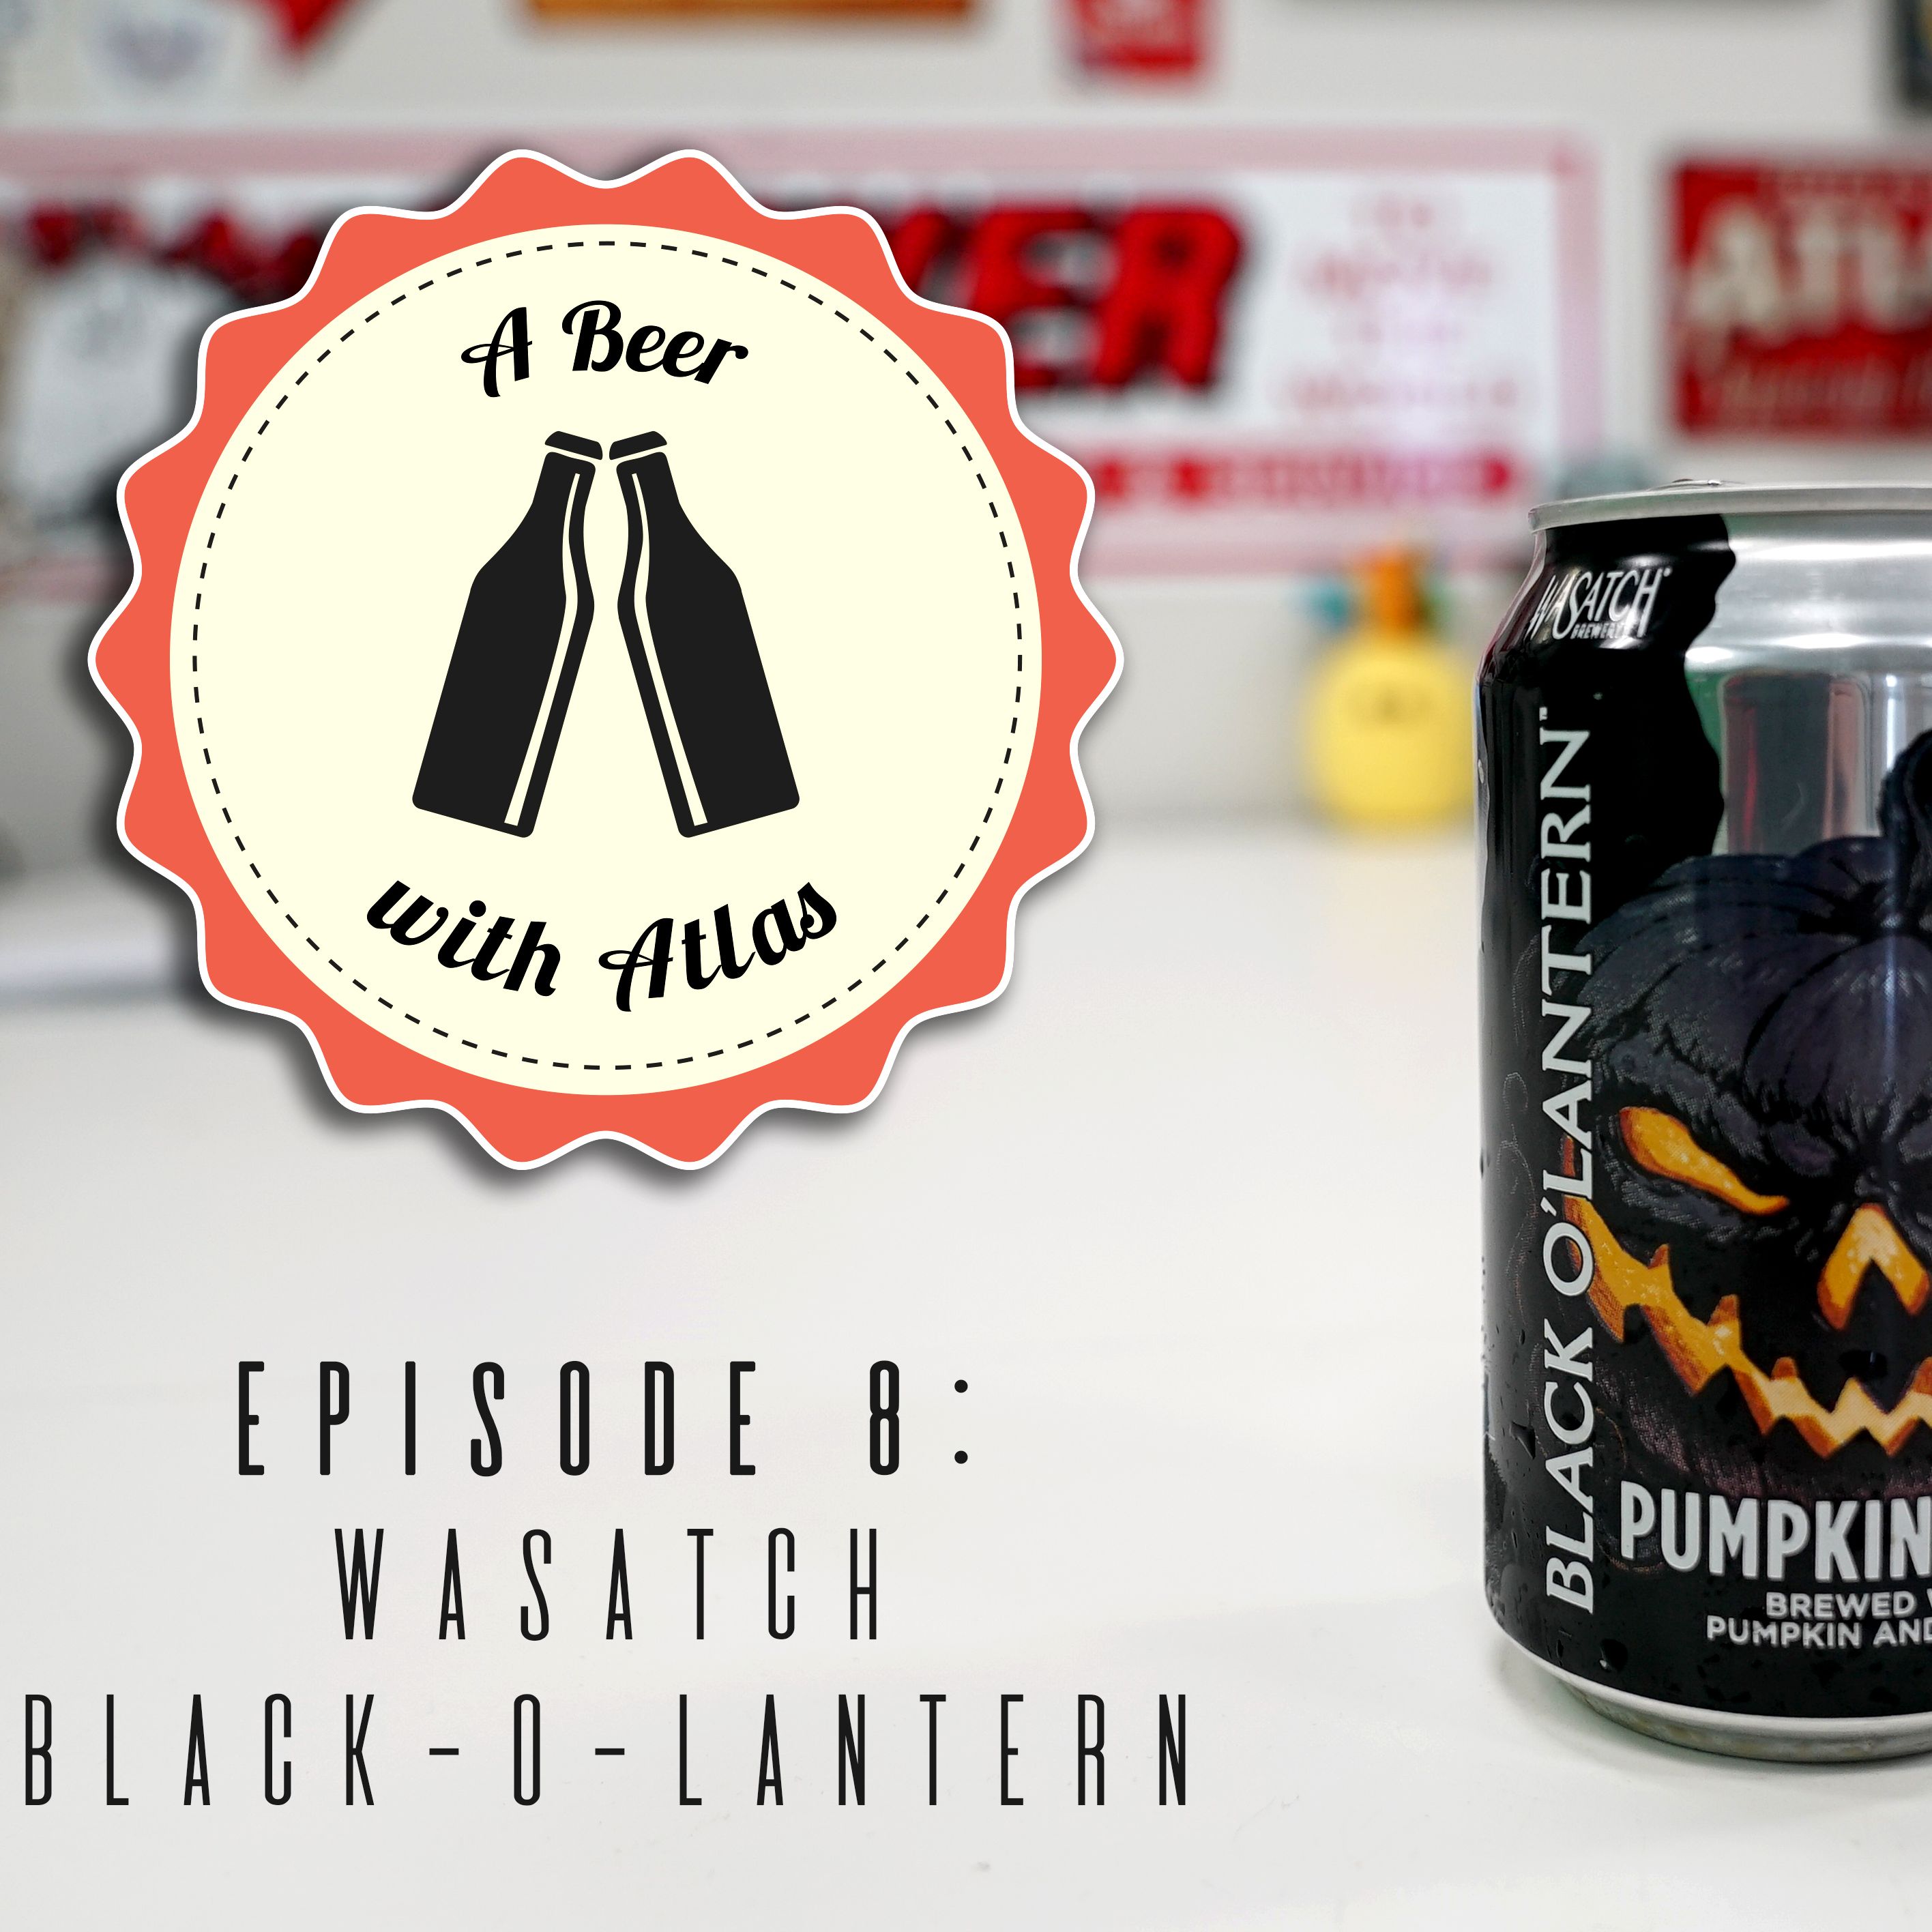 A Beer With Atlas #8 - Wasatch Black-O-Lantern